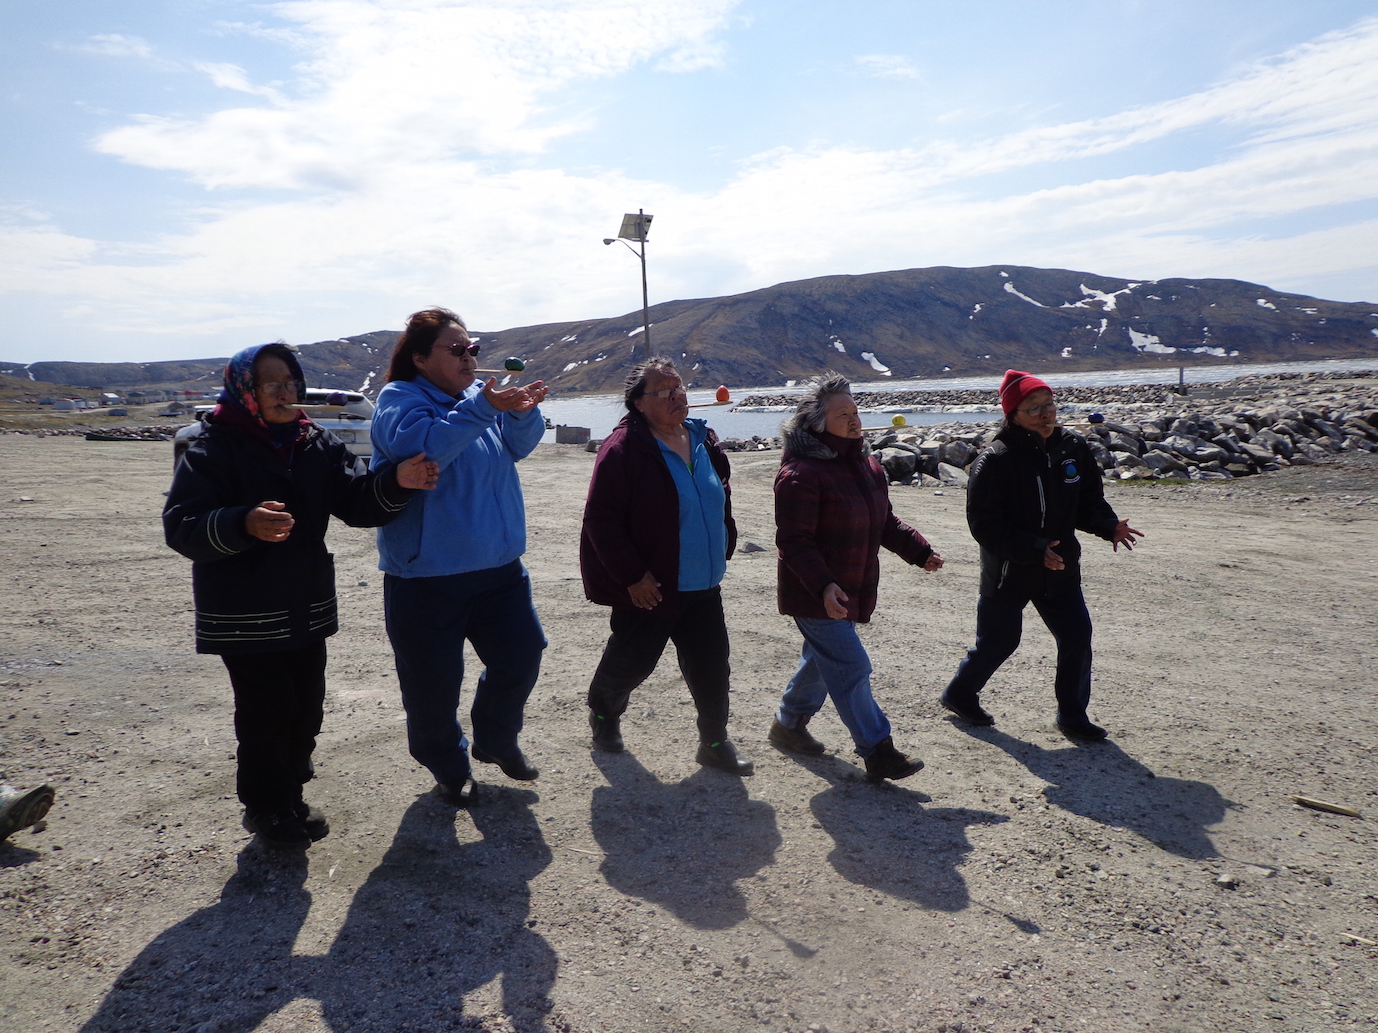 Photo 2: Kangiqsujuaq Elders running with an egg in a spoon, June 16 2014